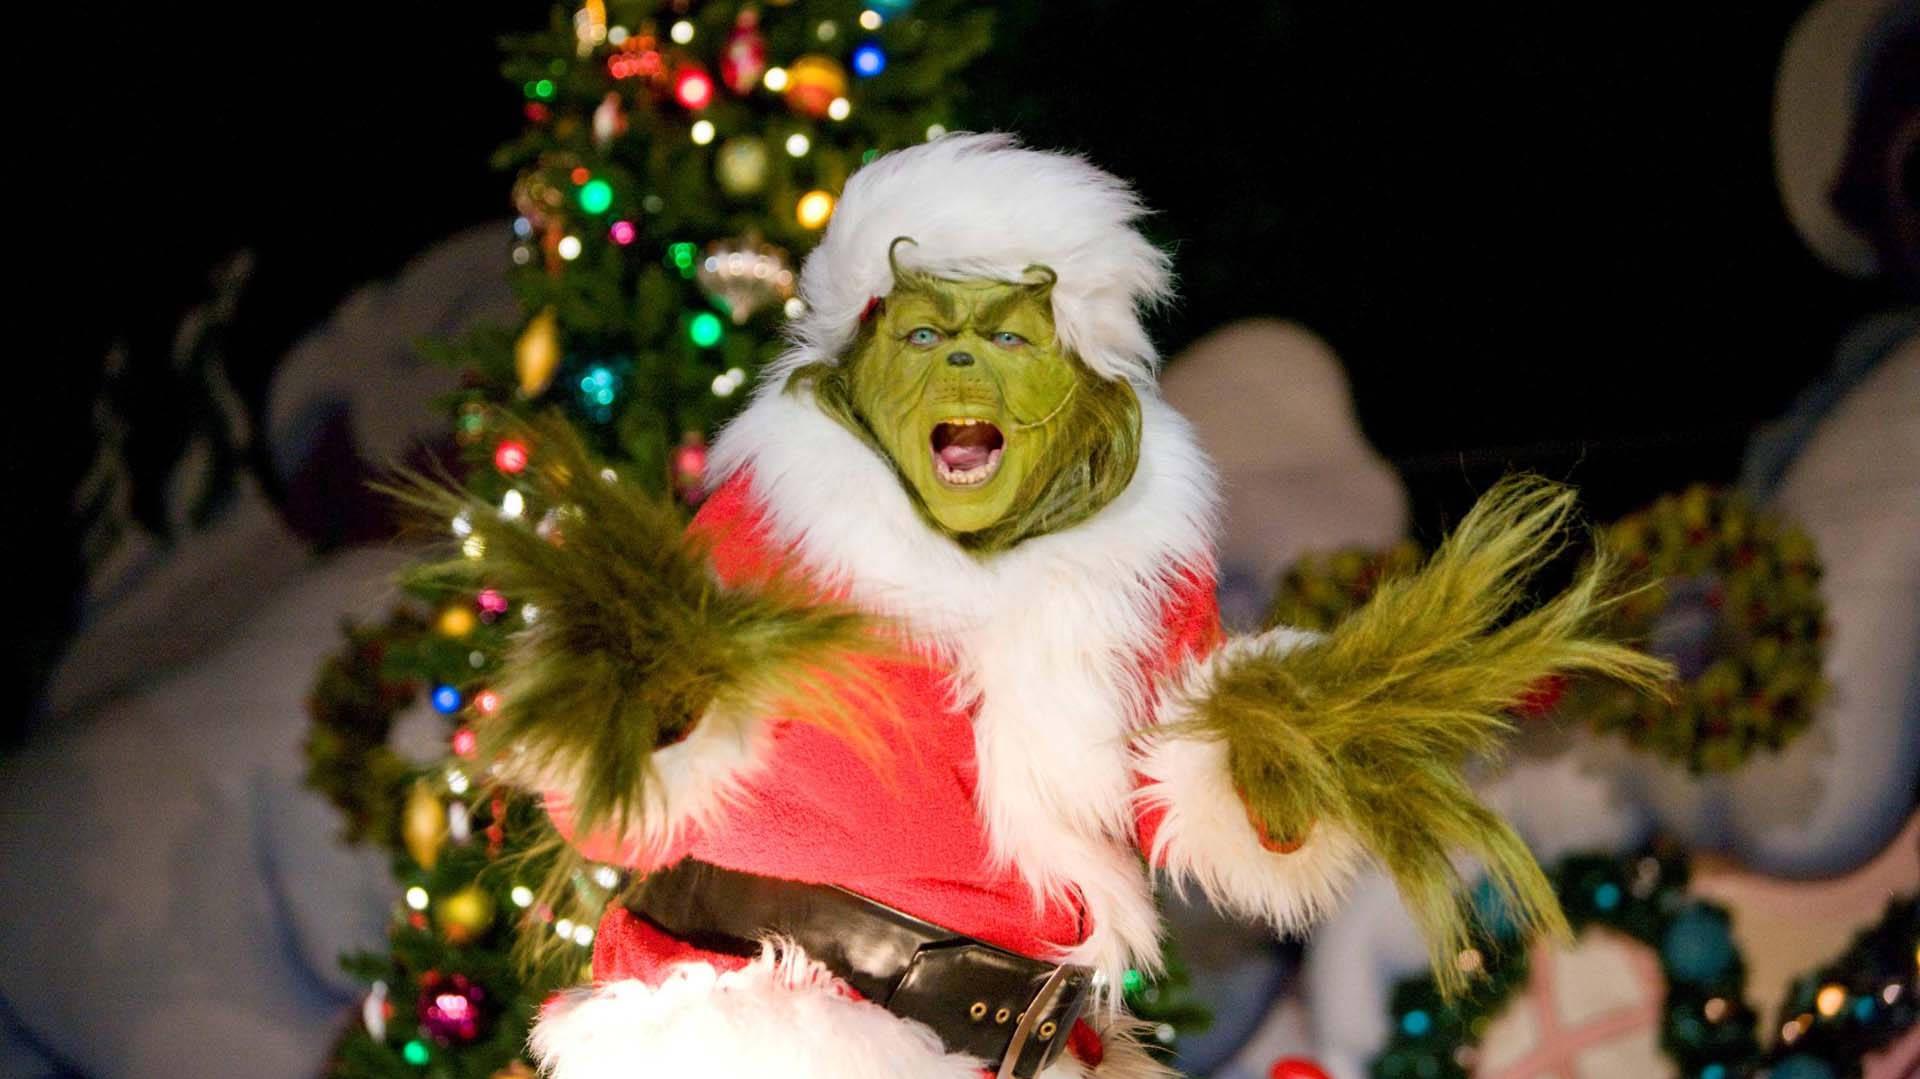  The Grinch Wallpapers